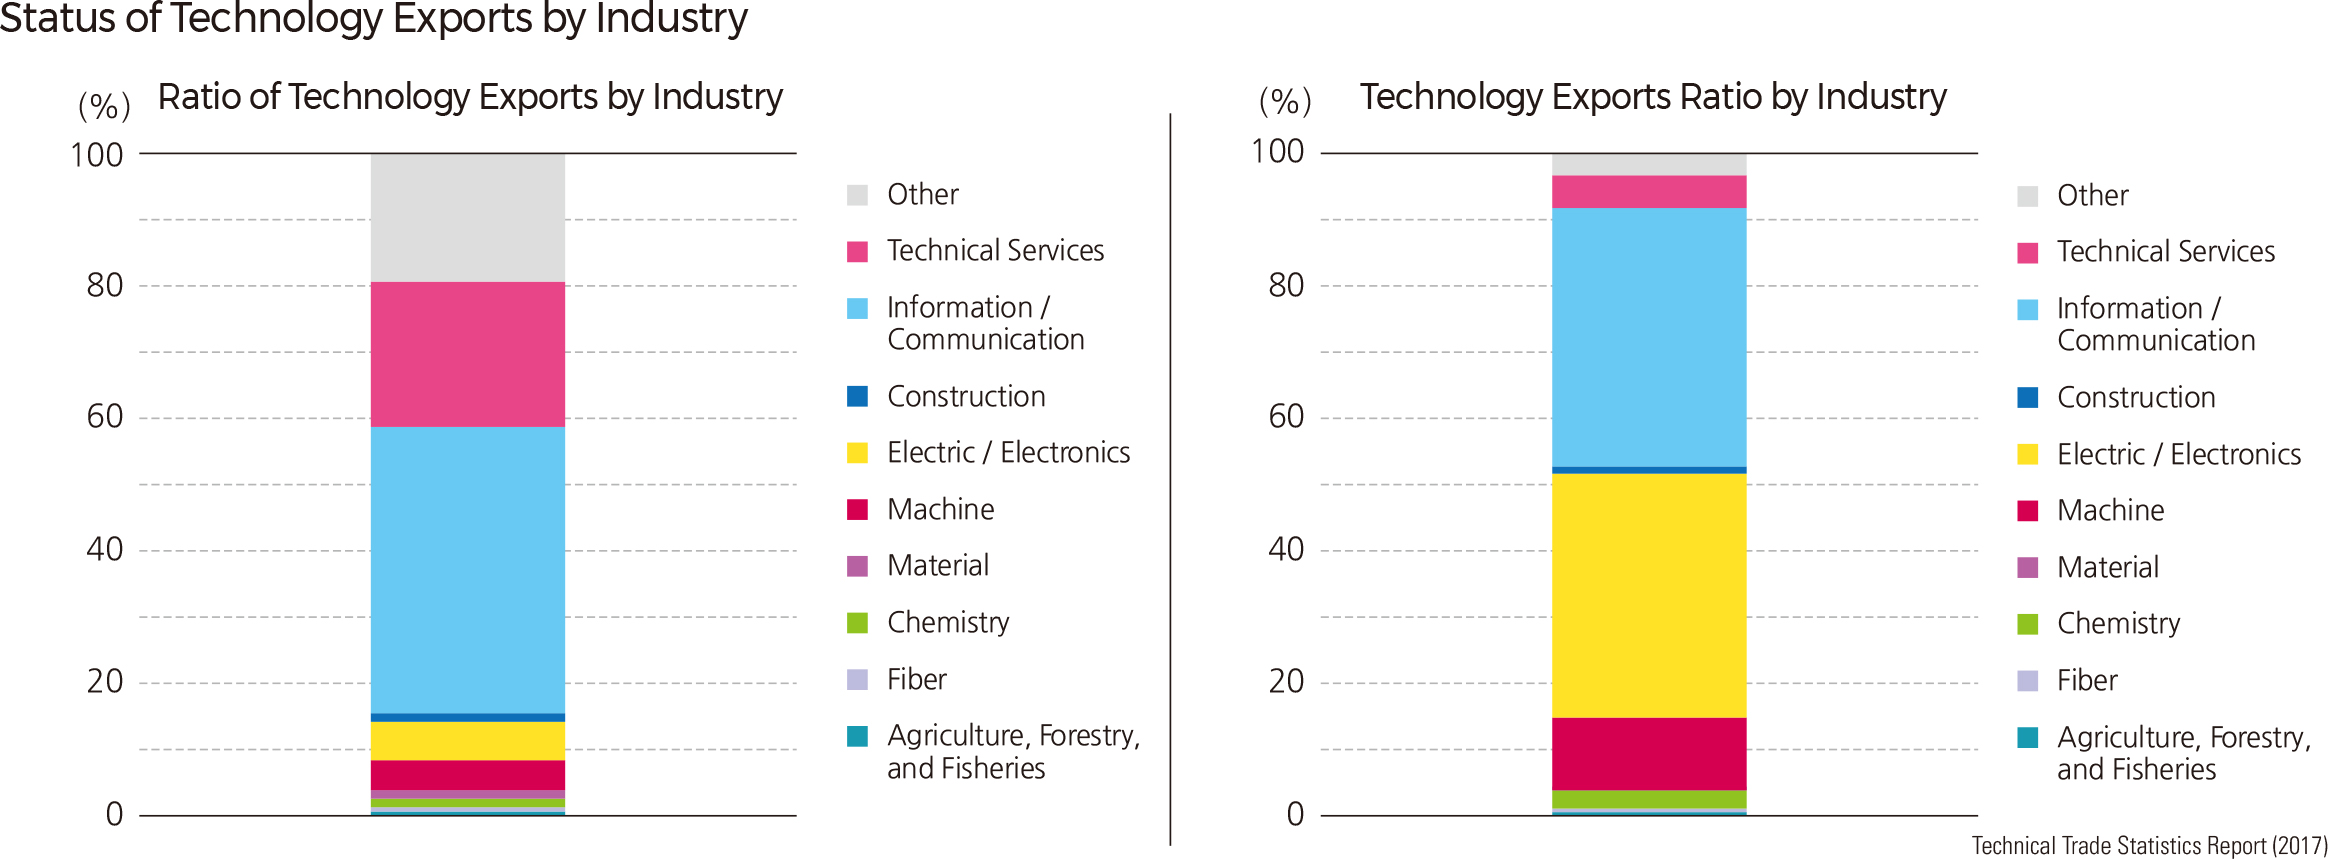 Status of Technology Exports by Industry